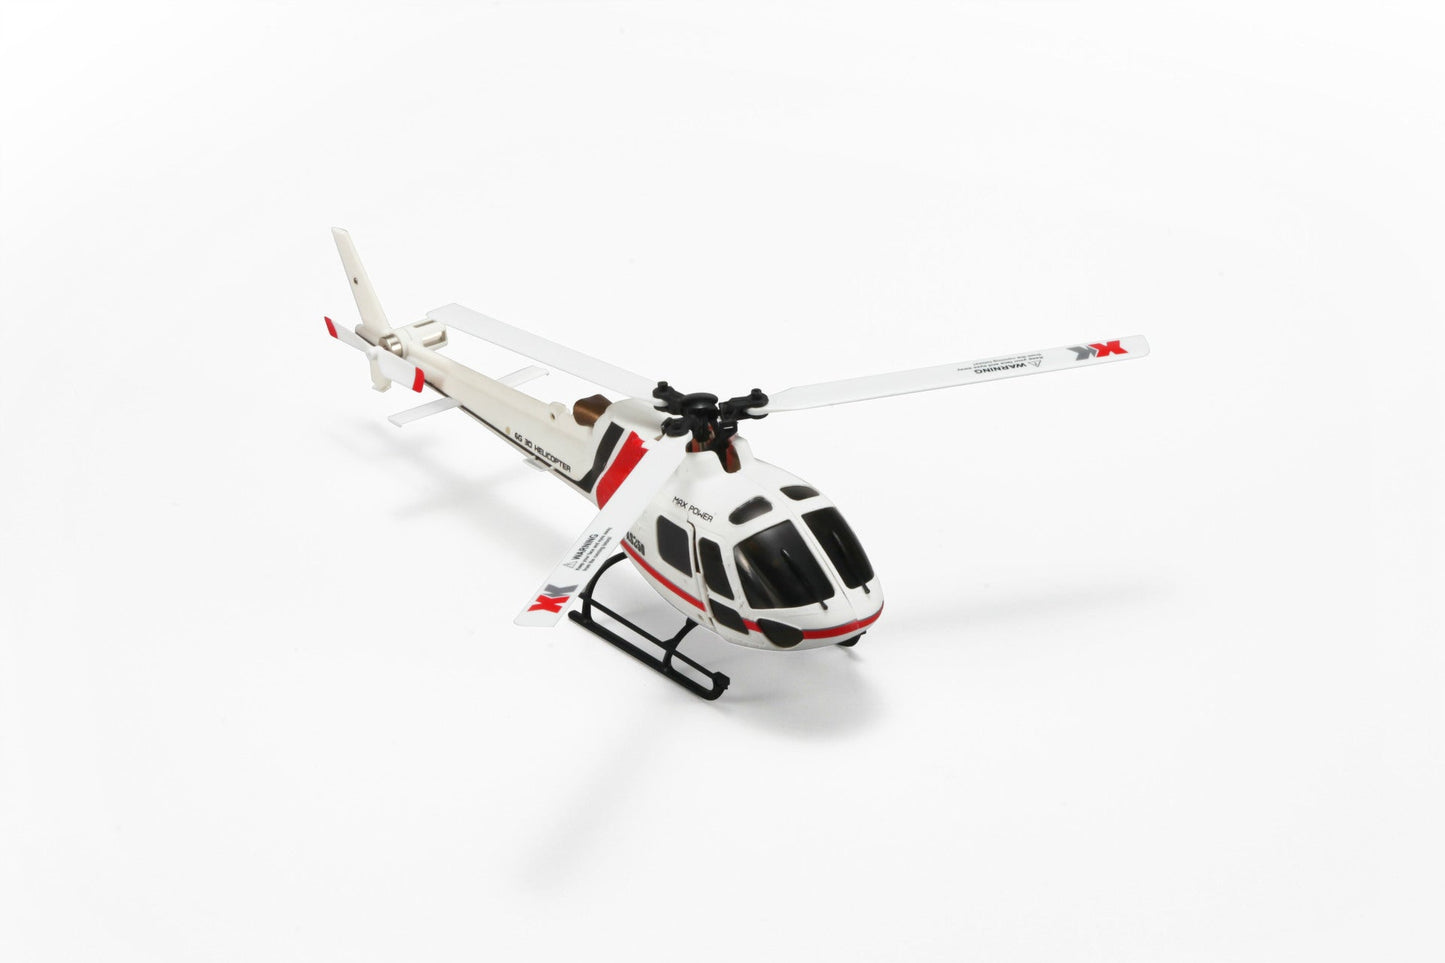 Six-channel Remote Control Helicopter